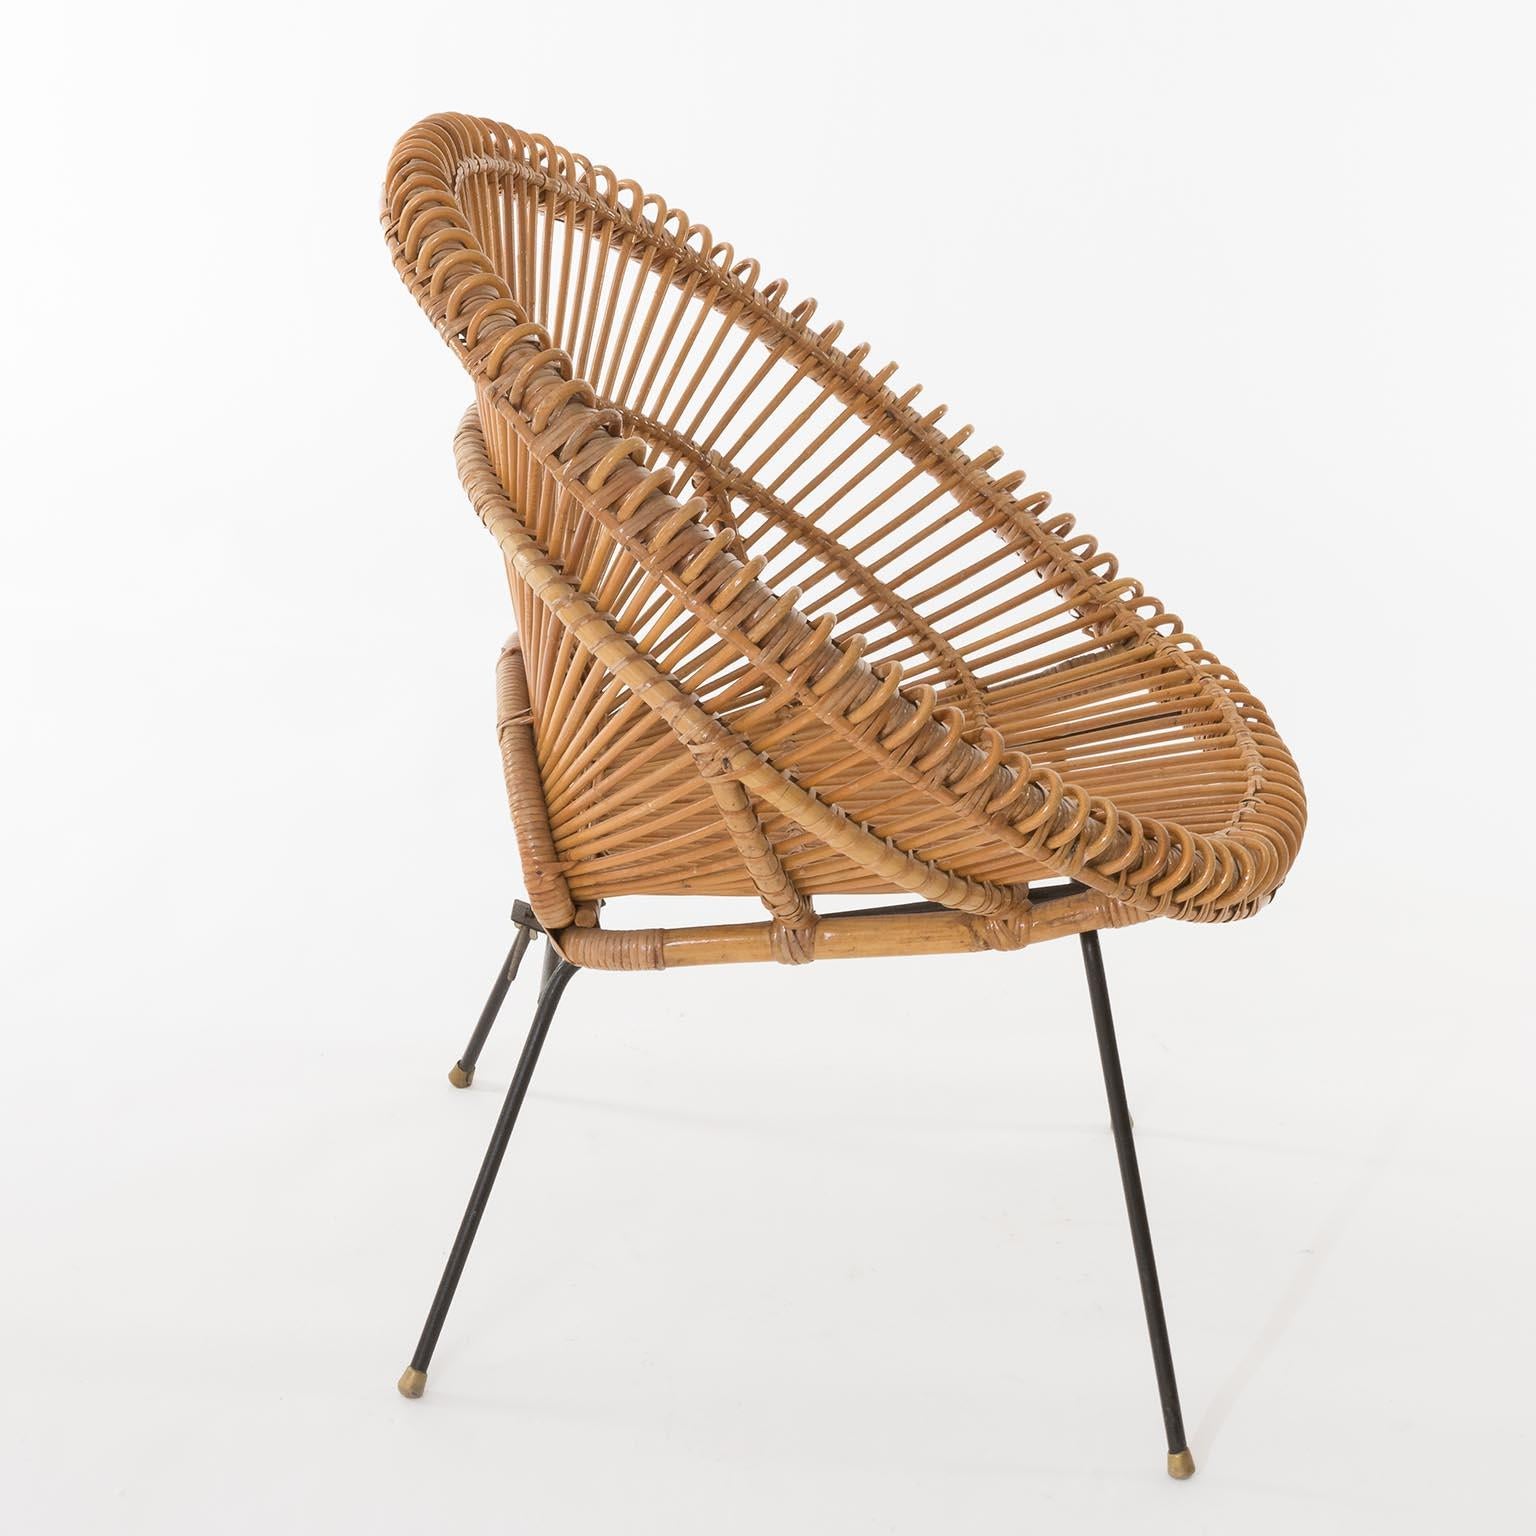 Pair of Mid-Century Modern Rattan Bamboo Chairs, Janine Abraham, Dirk Rol, 1960s For Sale 3